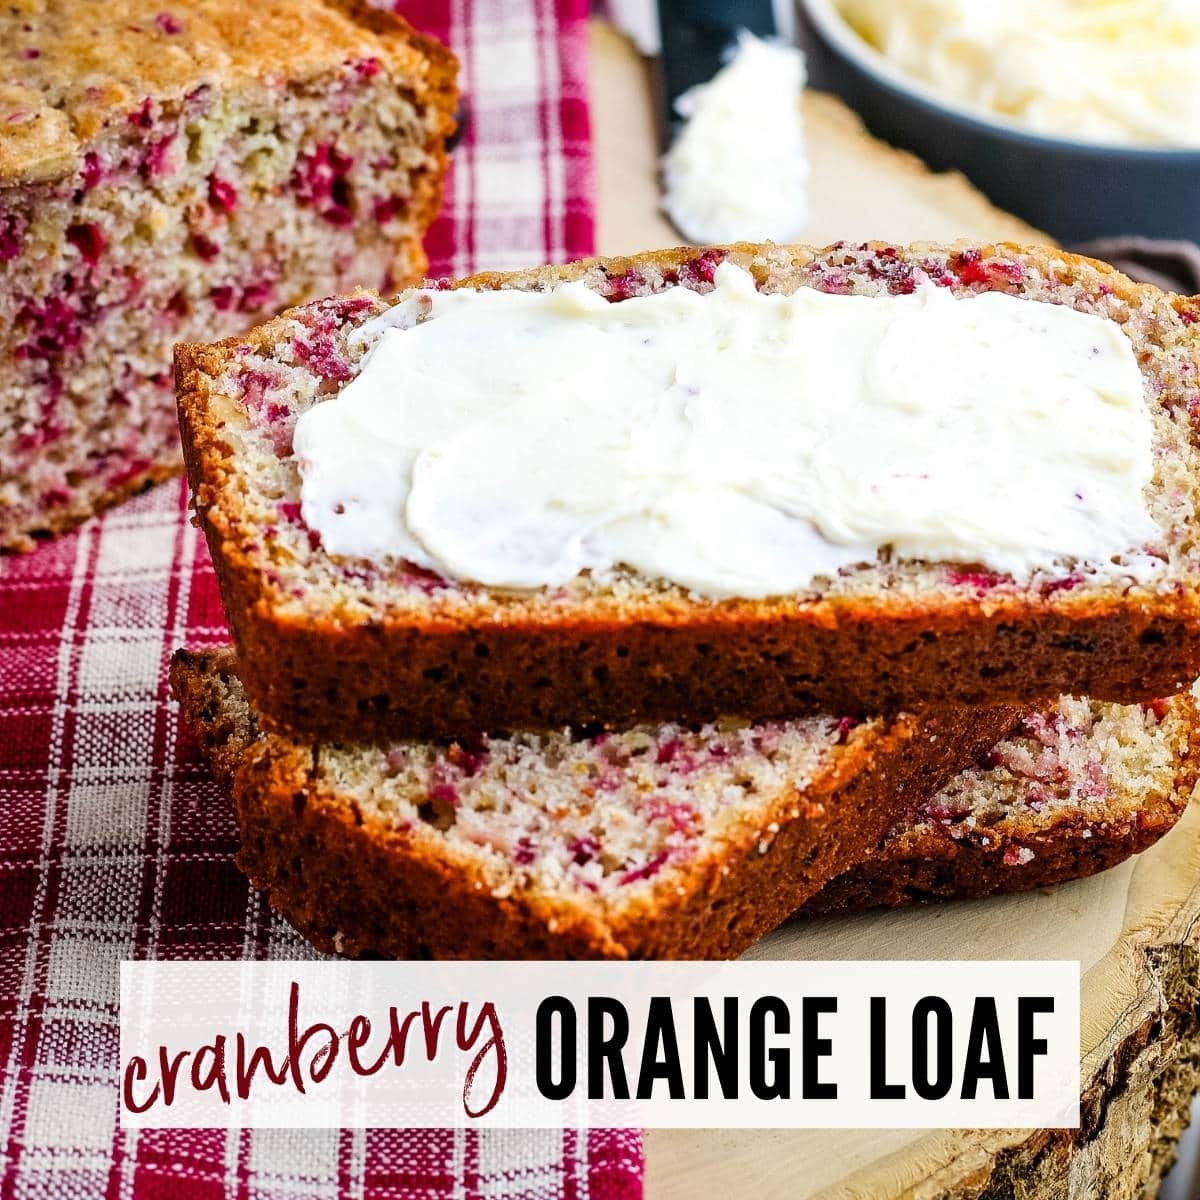 3 stacked slices of cranberry orange bread with icing.